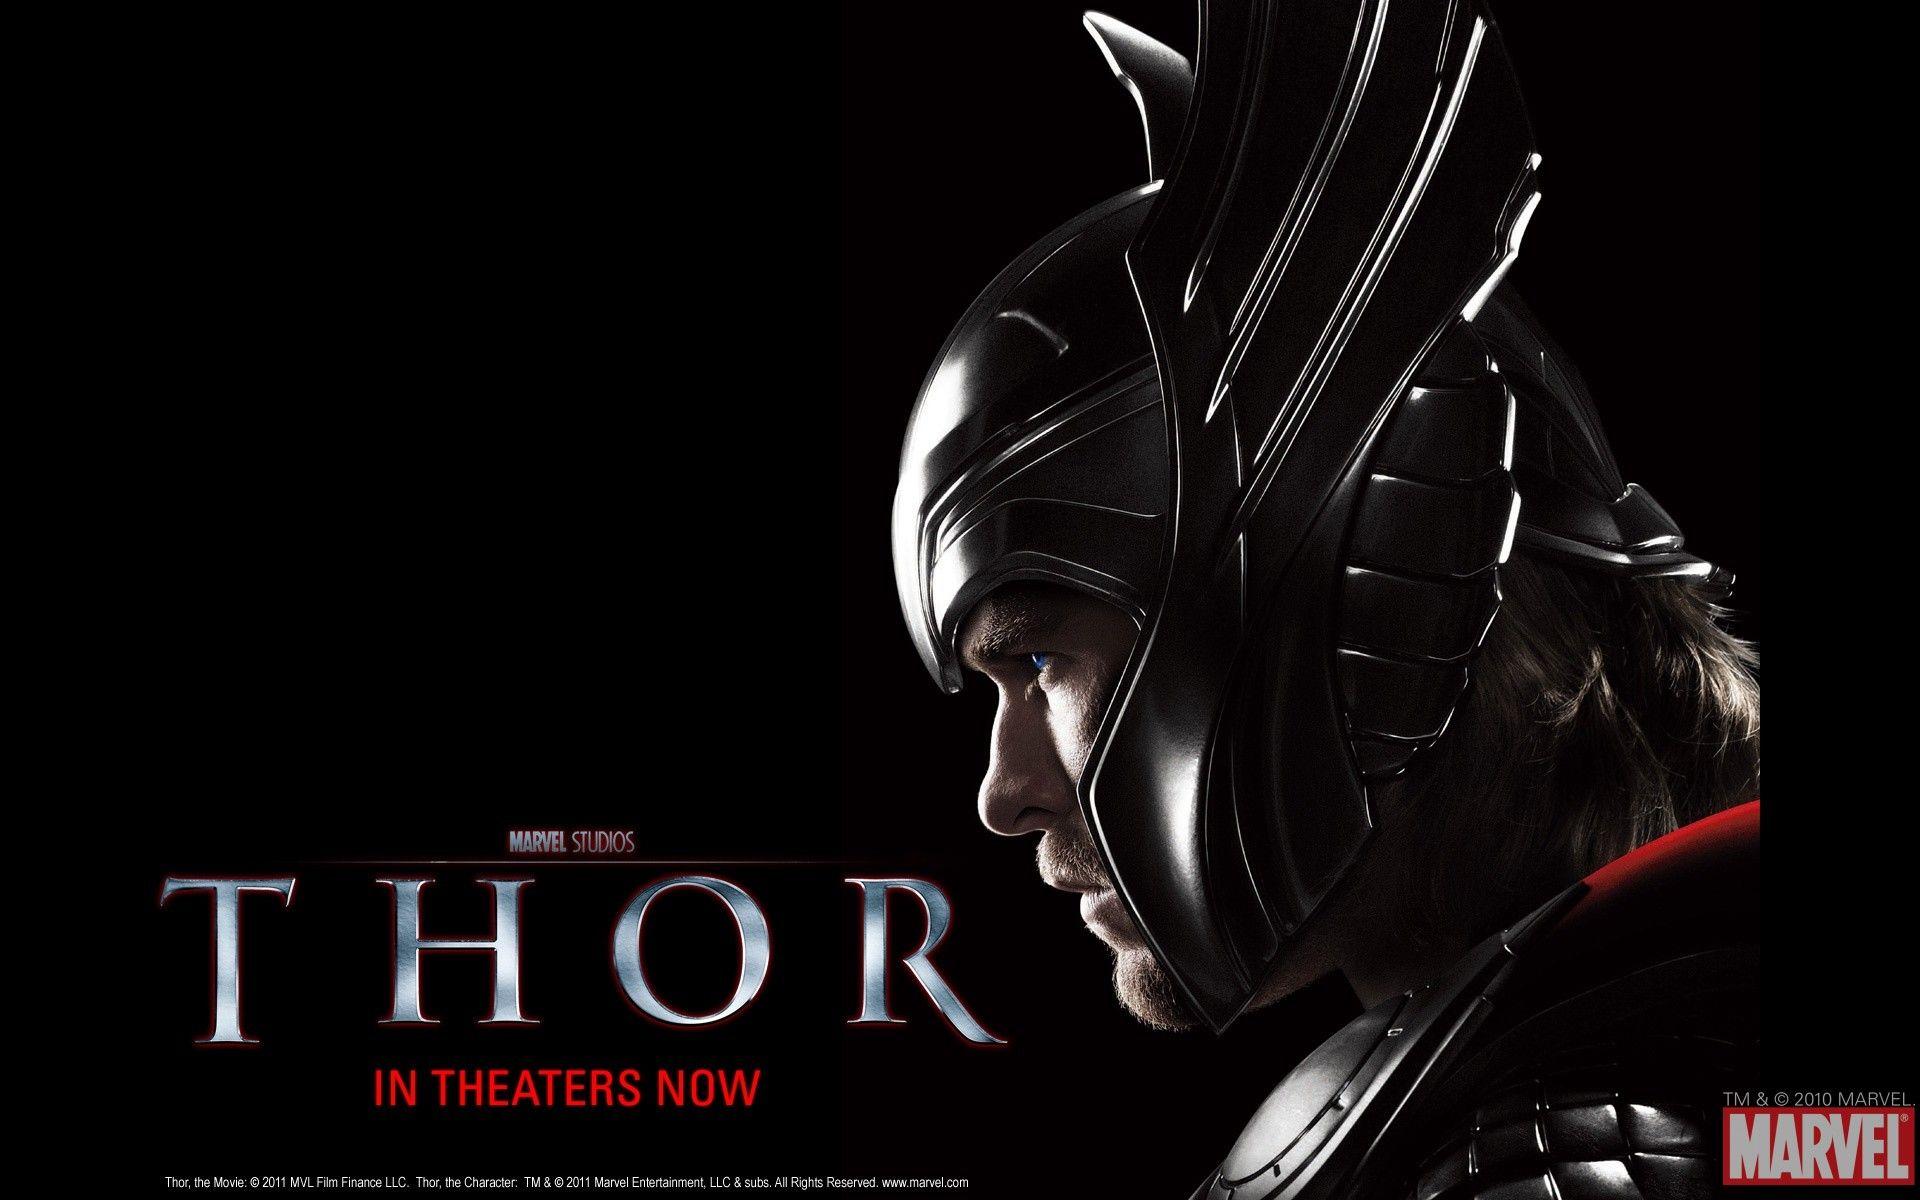 Download The Latest Thor HD Wallpaper From Wallpaper111.com. We